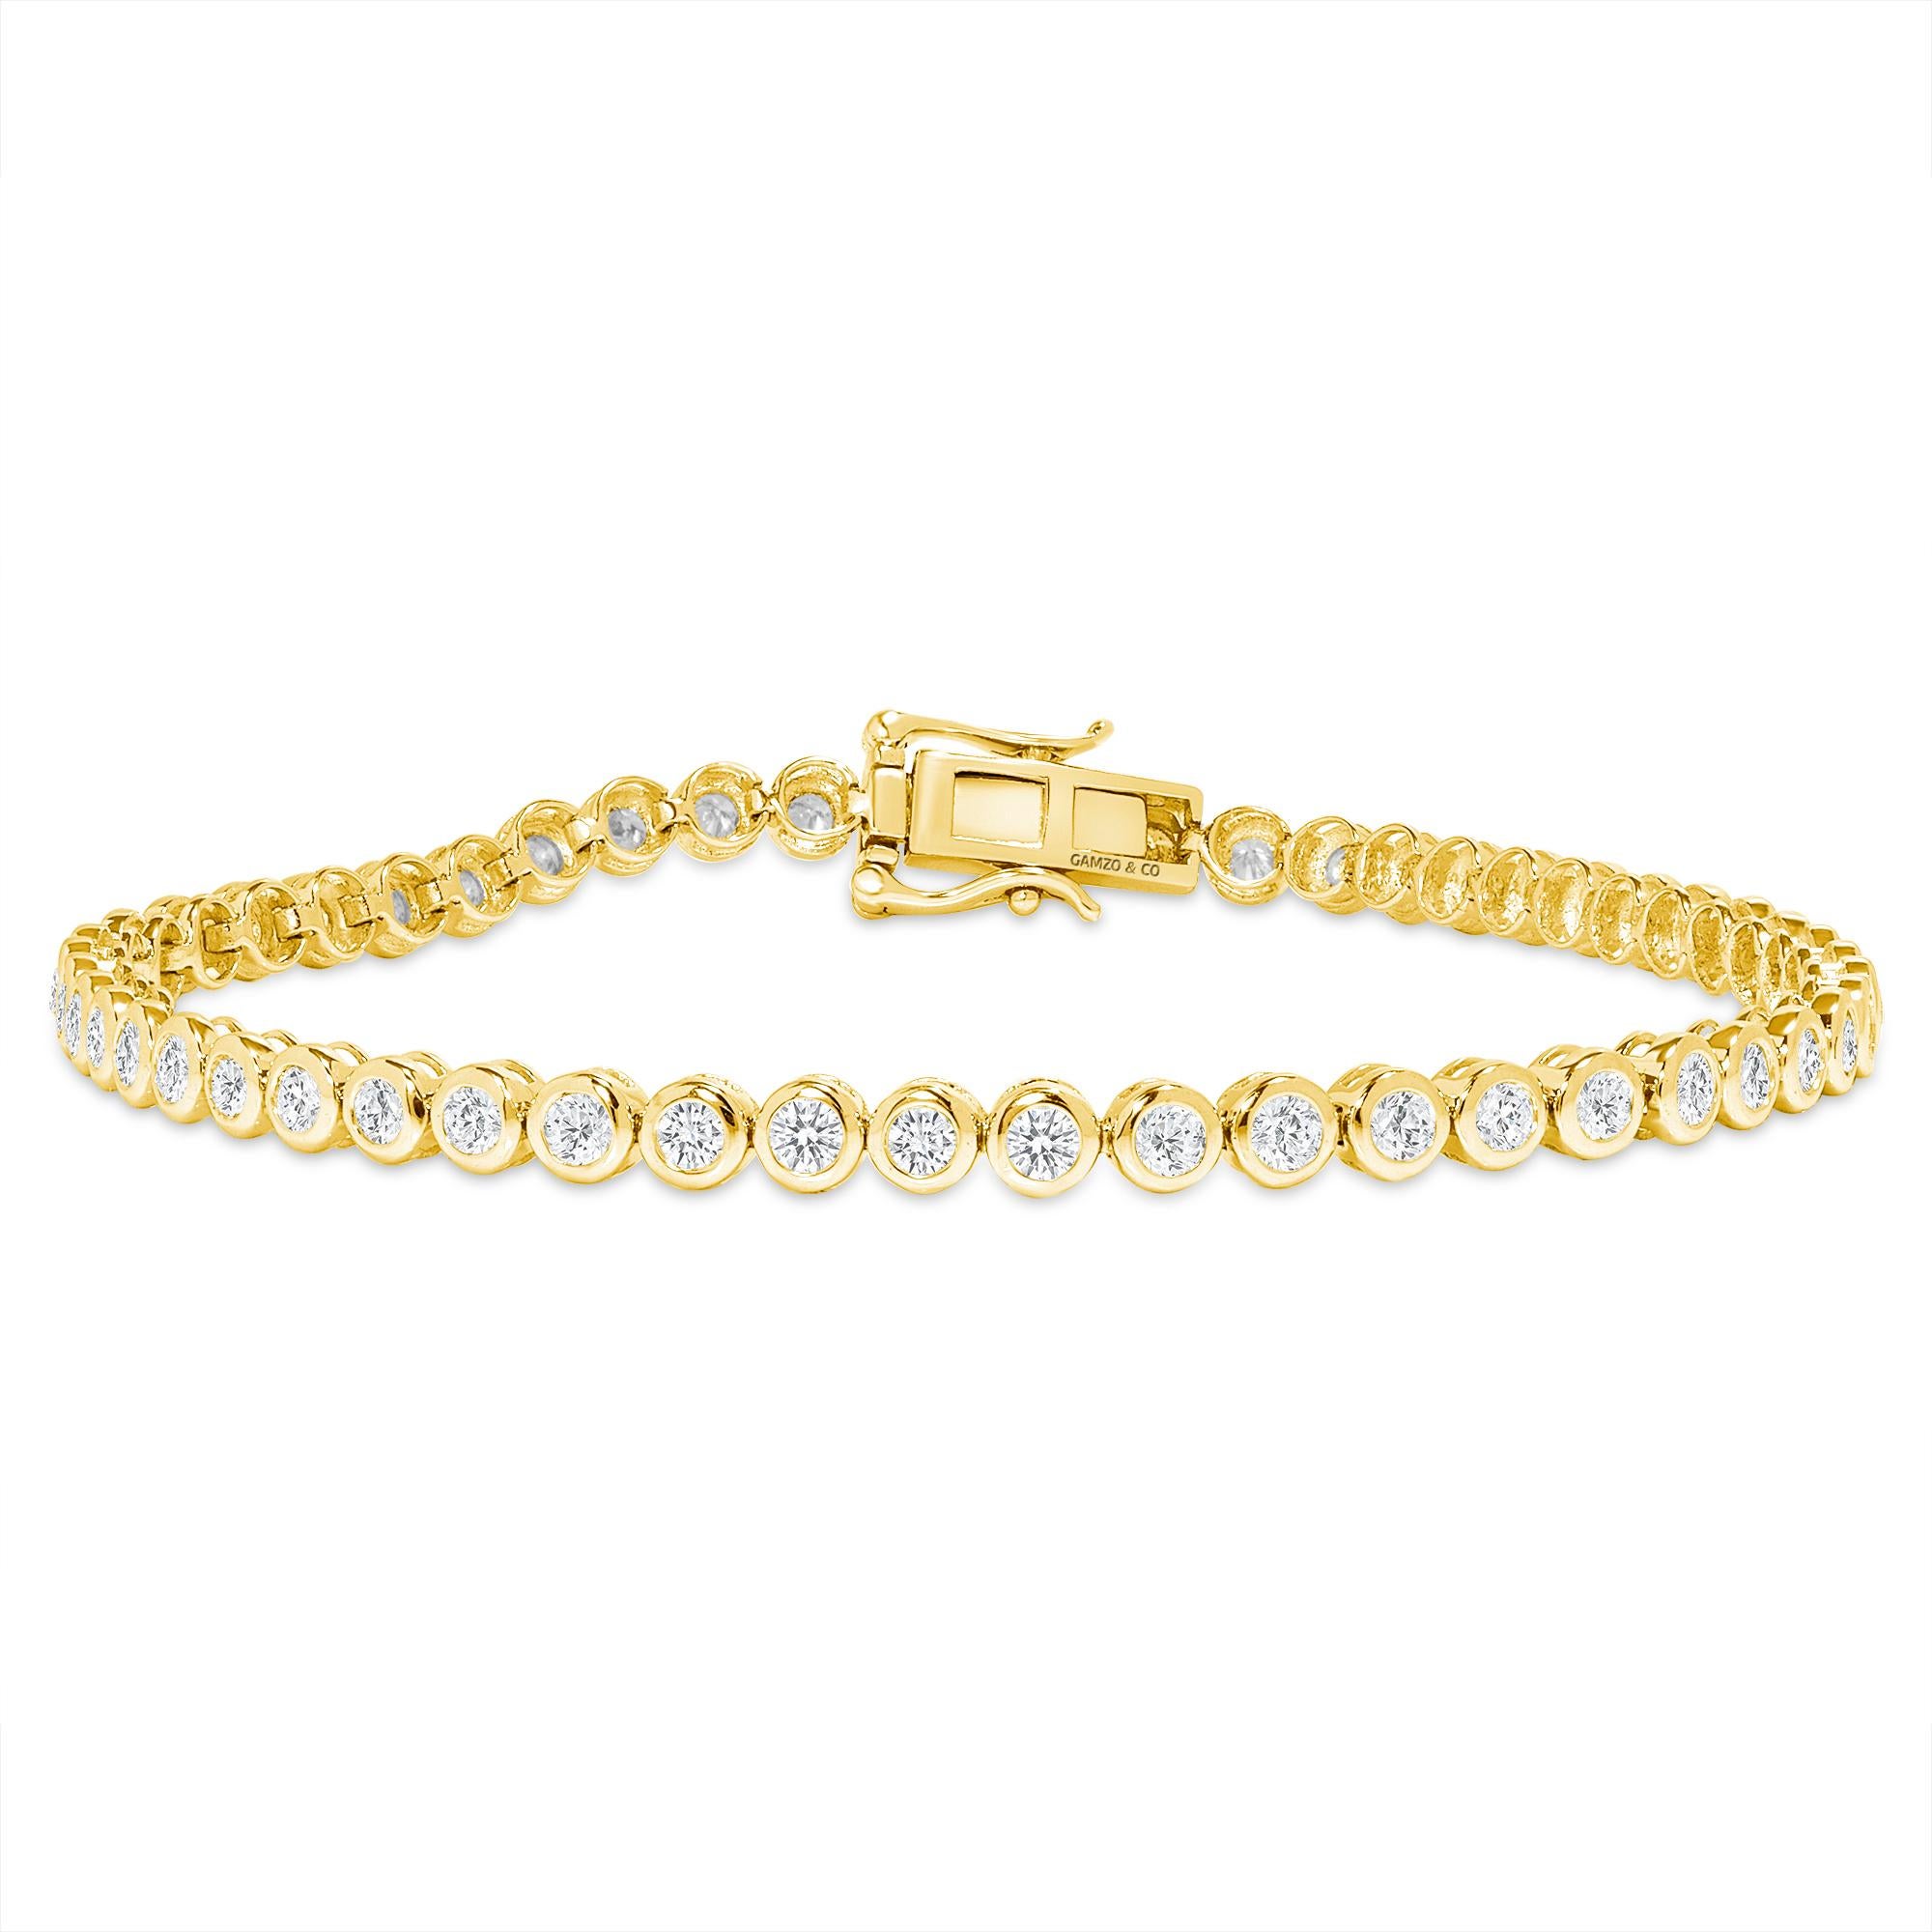 These beautiful round diamonds dance around your wrist as they absorb light and attention.
Metal: 14k Gold
Diamond Cut: Round
Diamond Total Carats: 3ct
Diamond Clarity: VS
Diamond Color: F
Color: Yellow Gold
Bracelet Length: 6.5 Inches 
Included